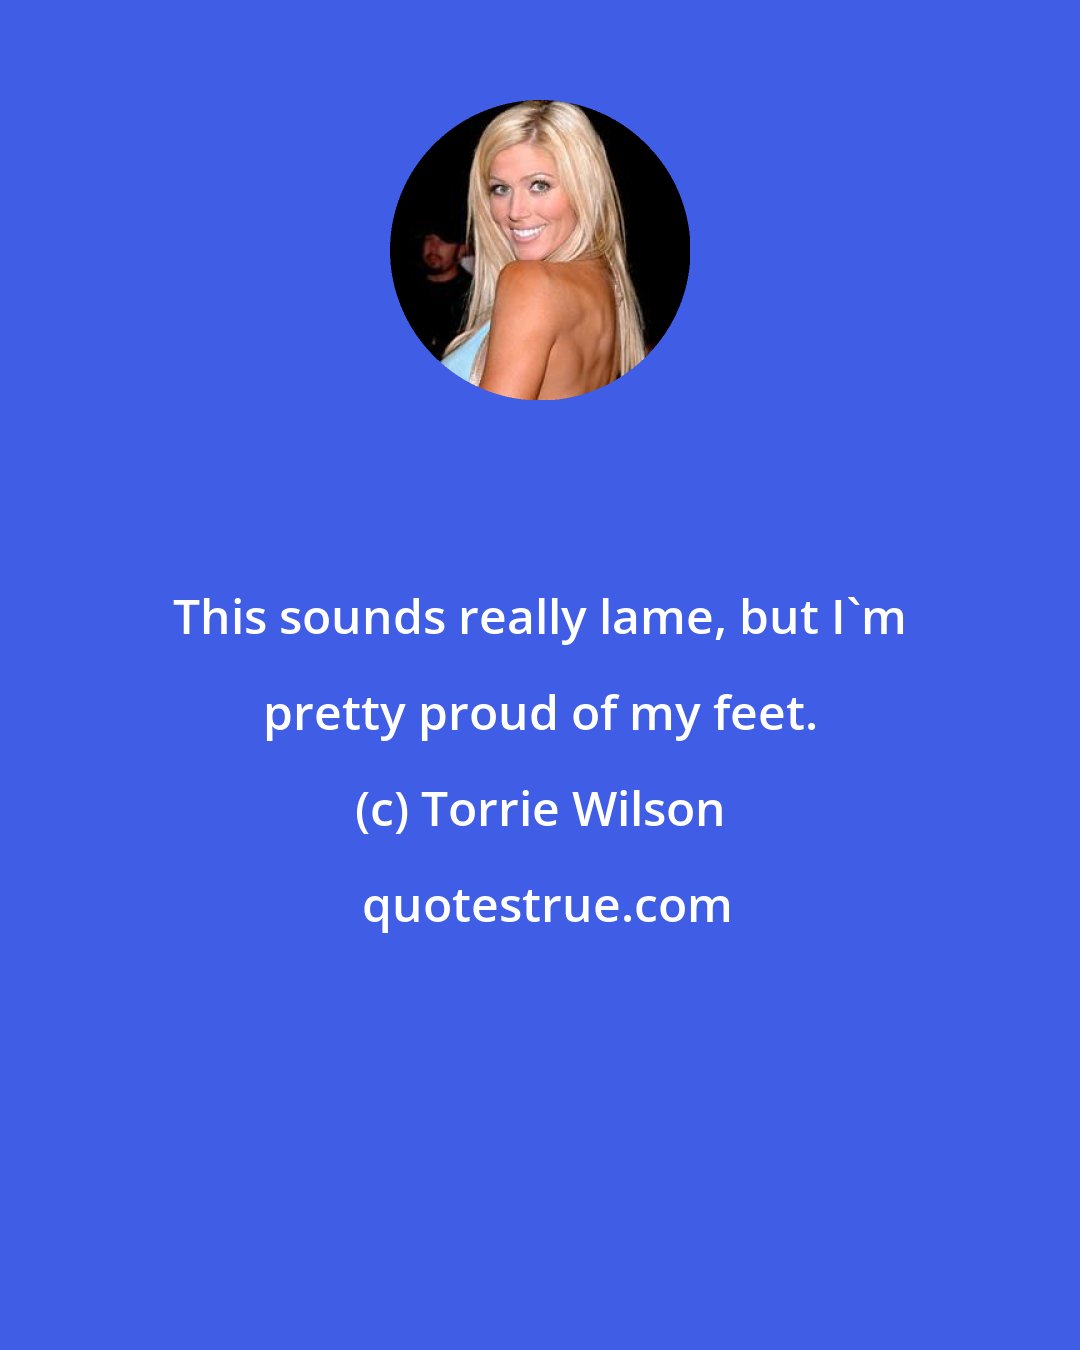 Torrie Wilson: This sounds really lame, but I'm pretty proud of my feet.